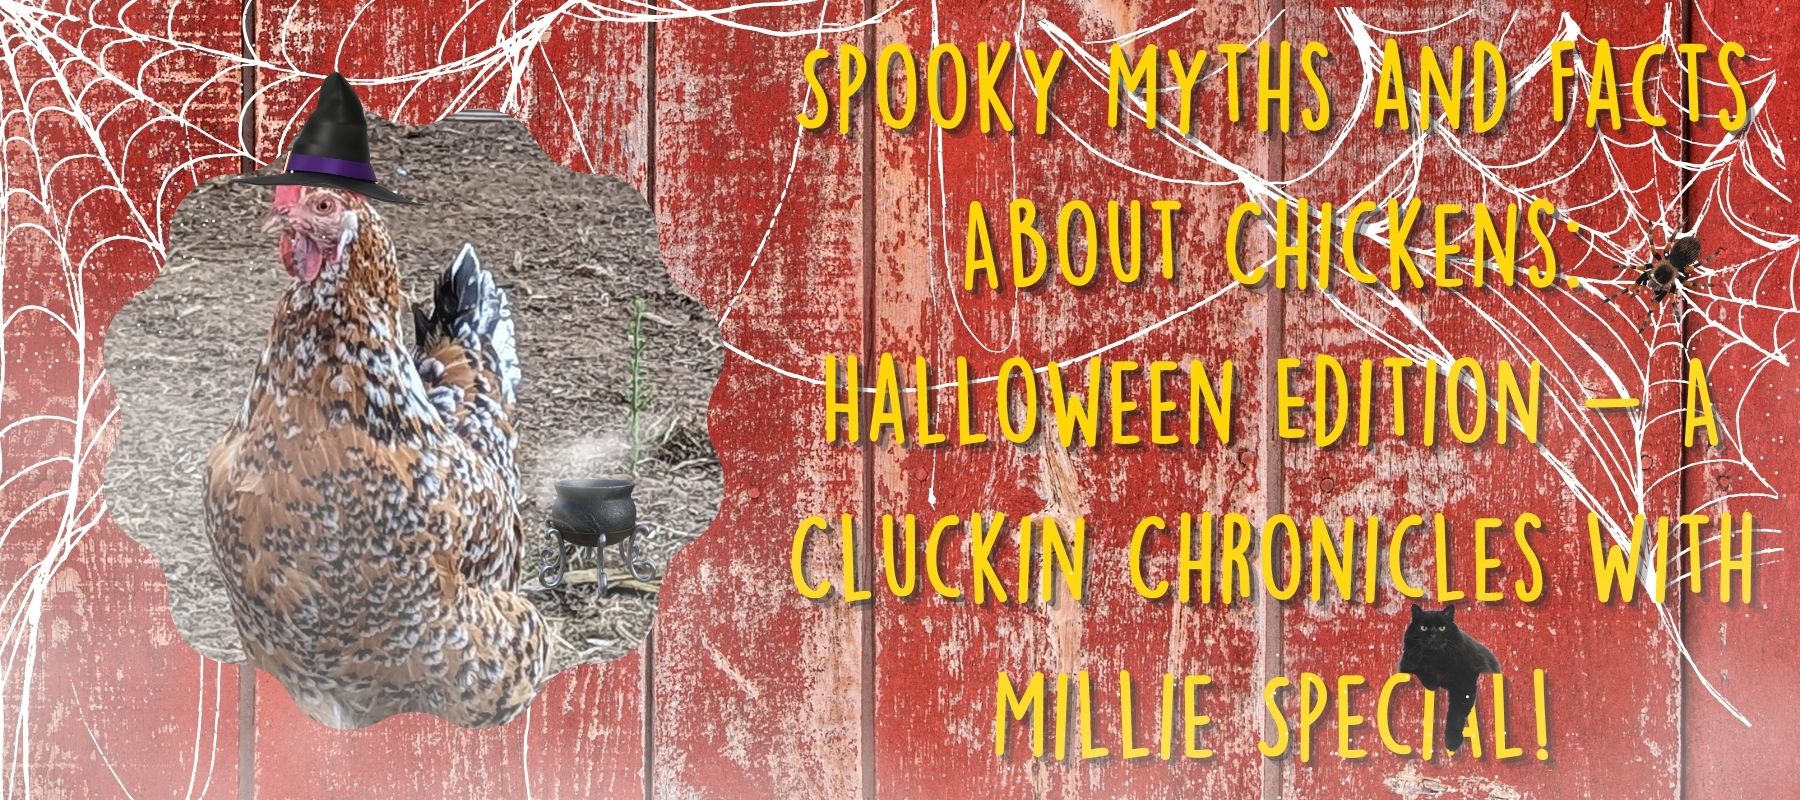 Spooky Myths and Facts About Chickens: Halloween Edition - A Cluckin Chronicles With Millie Special!